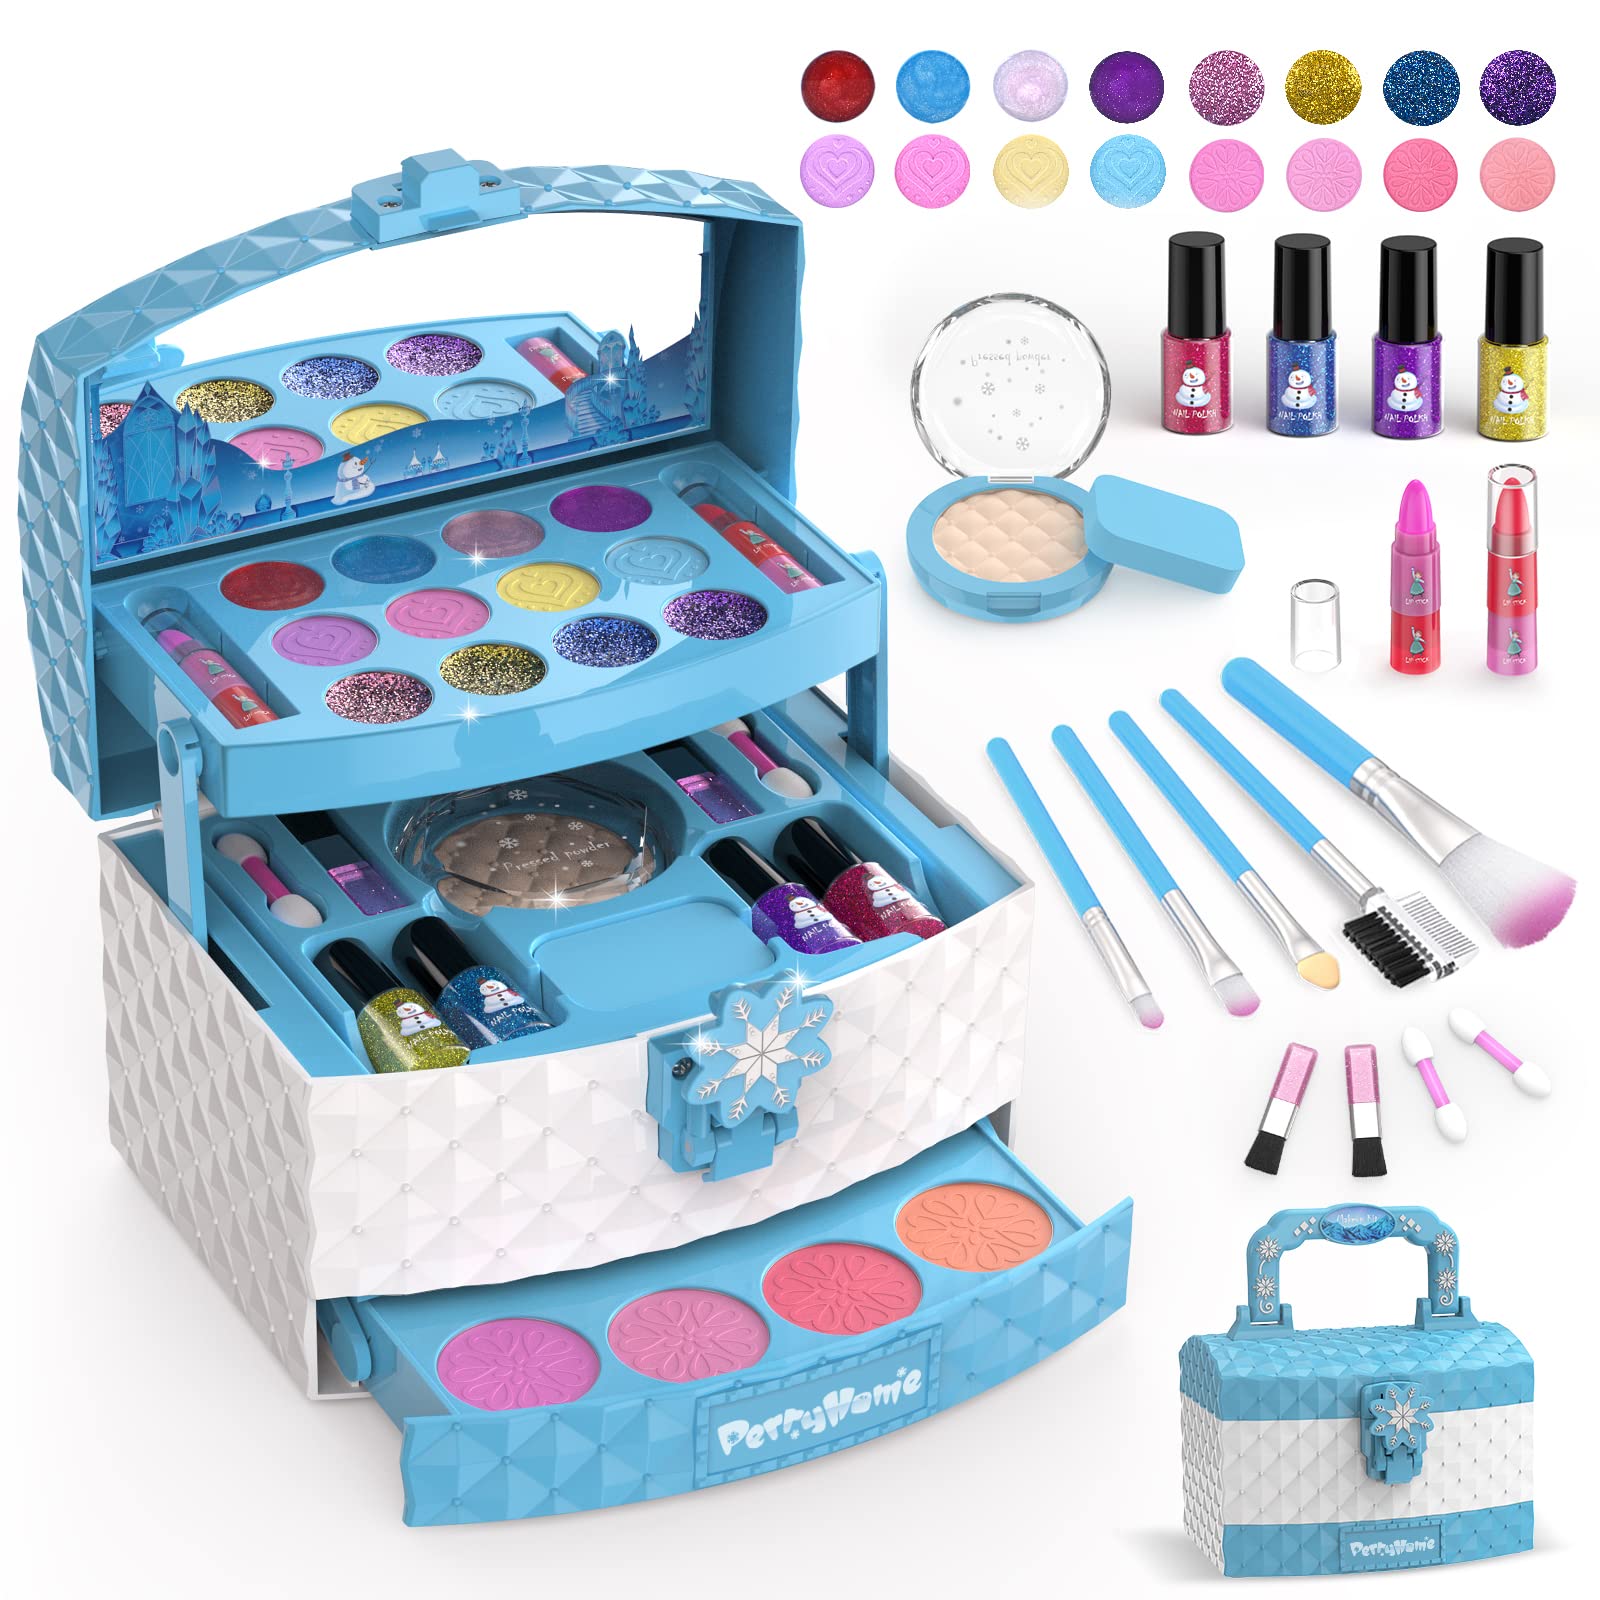 PERRYHOME Kids Makeup Kit for Girl 35 Pcs Washable Real Cosmetic, Safe & Non-Toxic Little Girl Makeup Set, Frozen Makeup Set for 3-12 Year Old Kids Toddler Girl Toys Birthday Gift (Soft Blue)